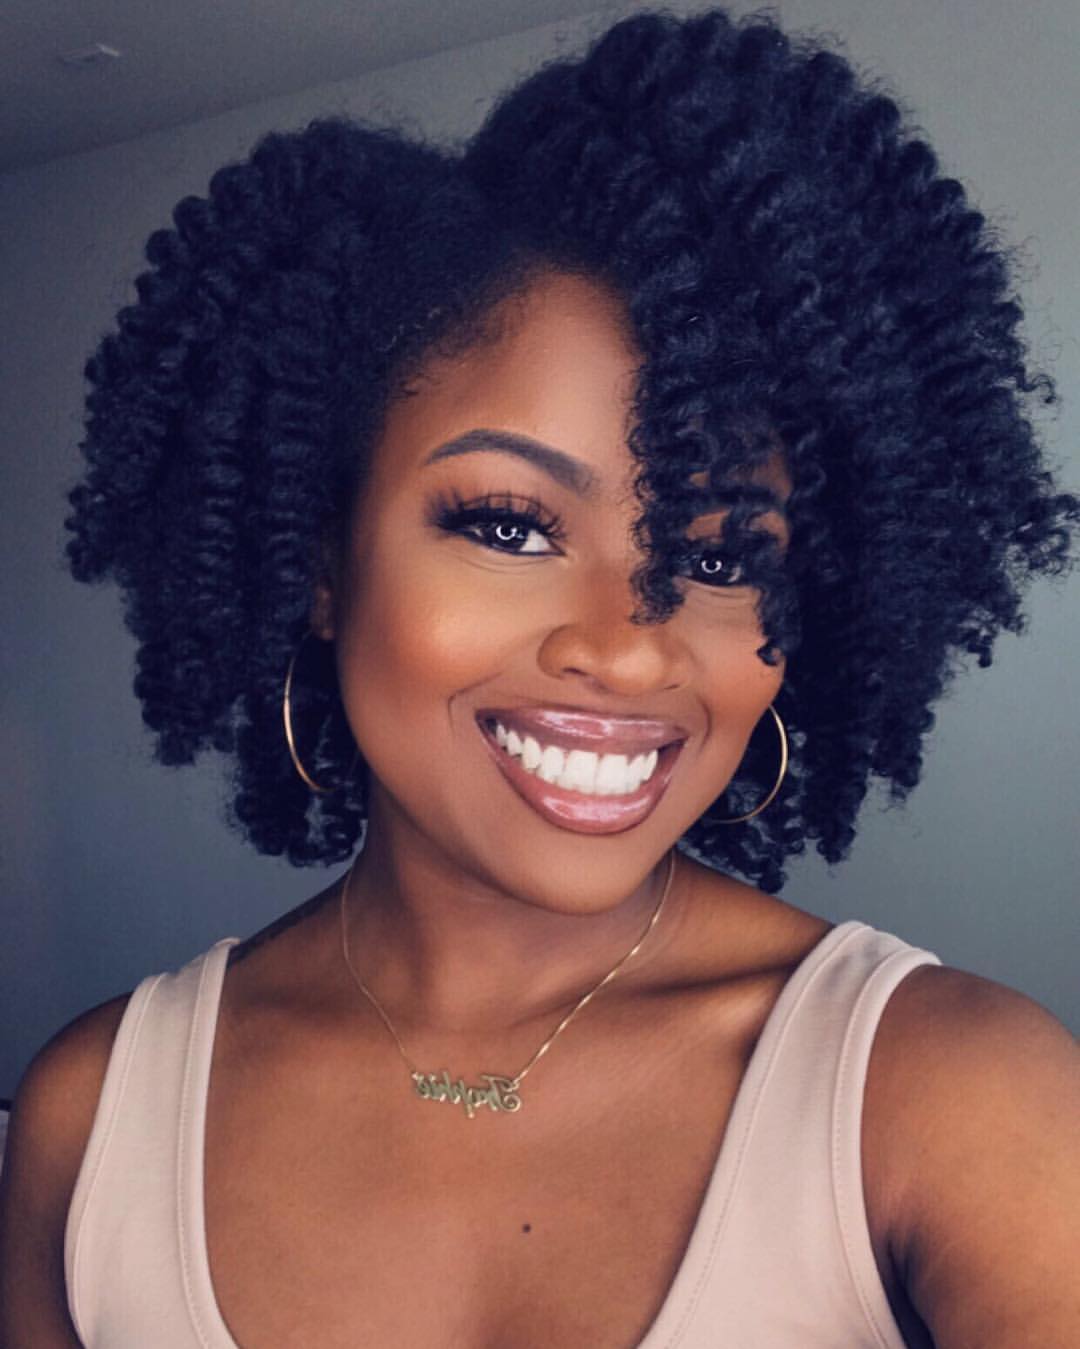 25 Natural Braided Hairstyles: Simple Styles You'll Love Wearing ...